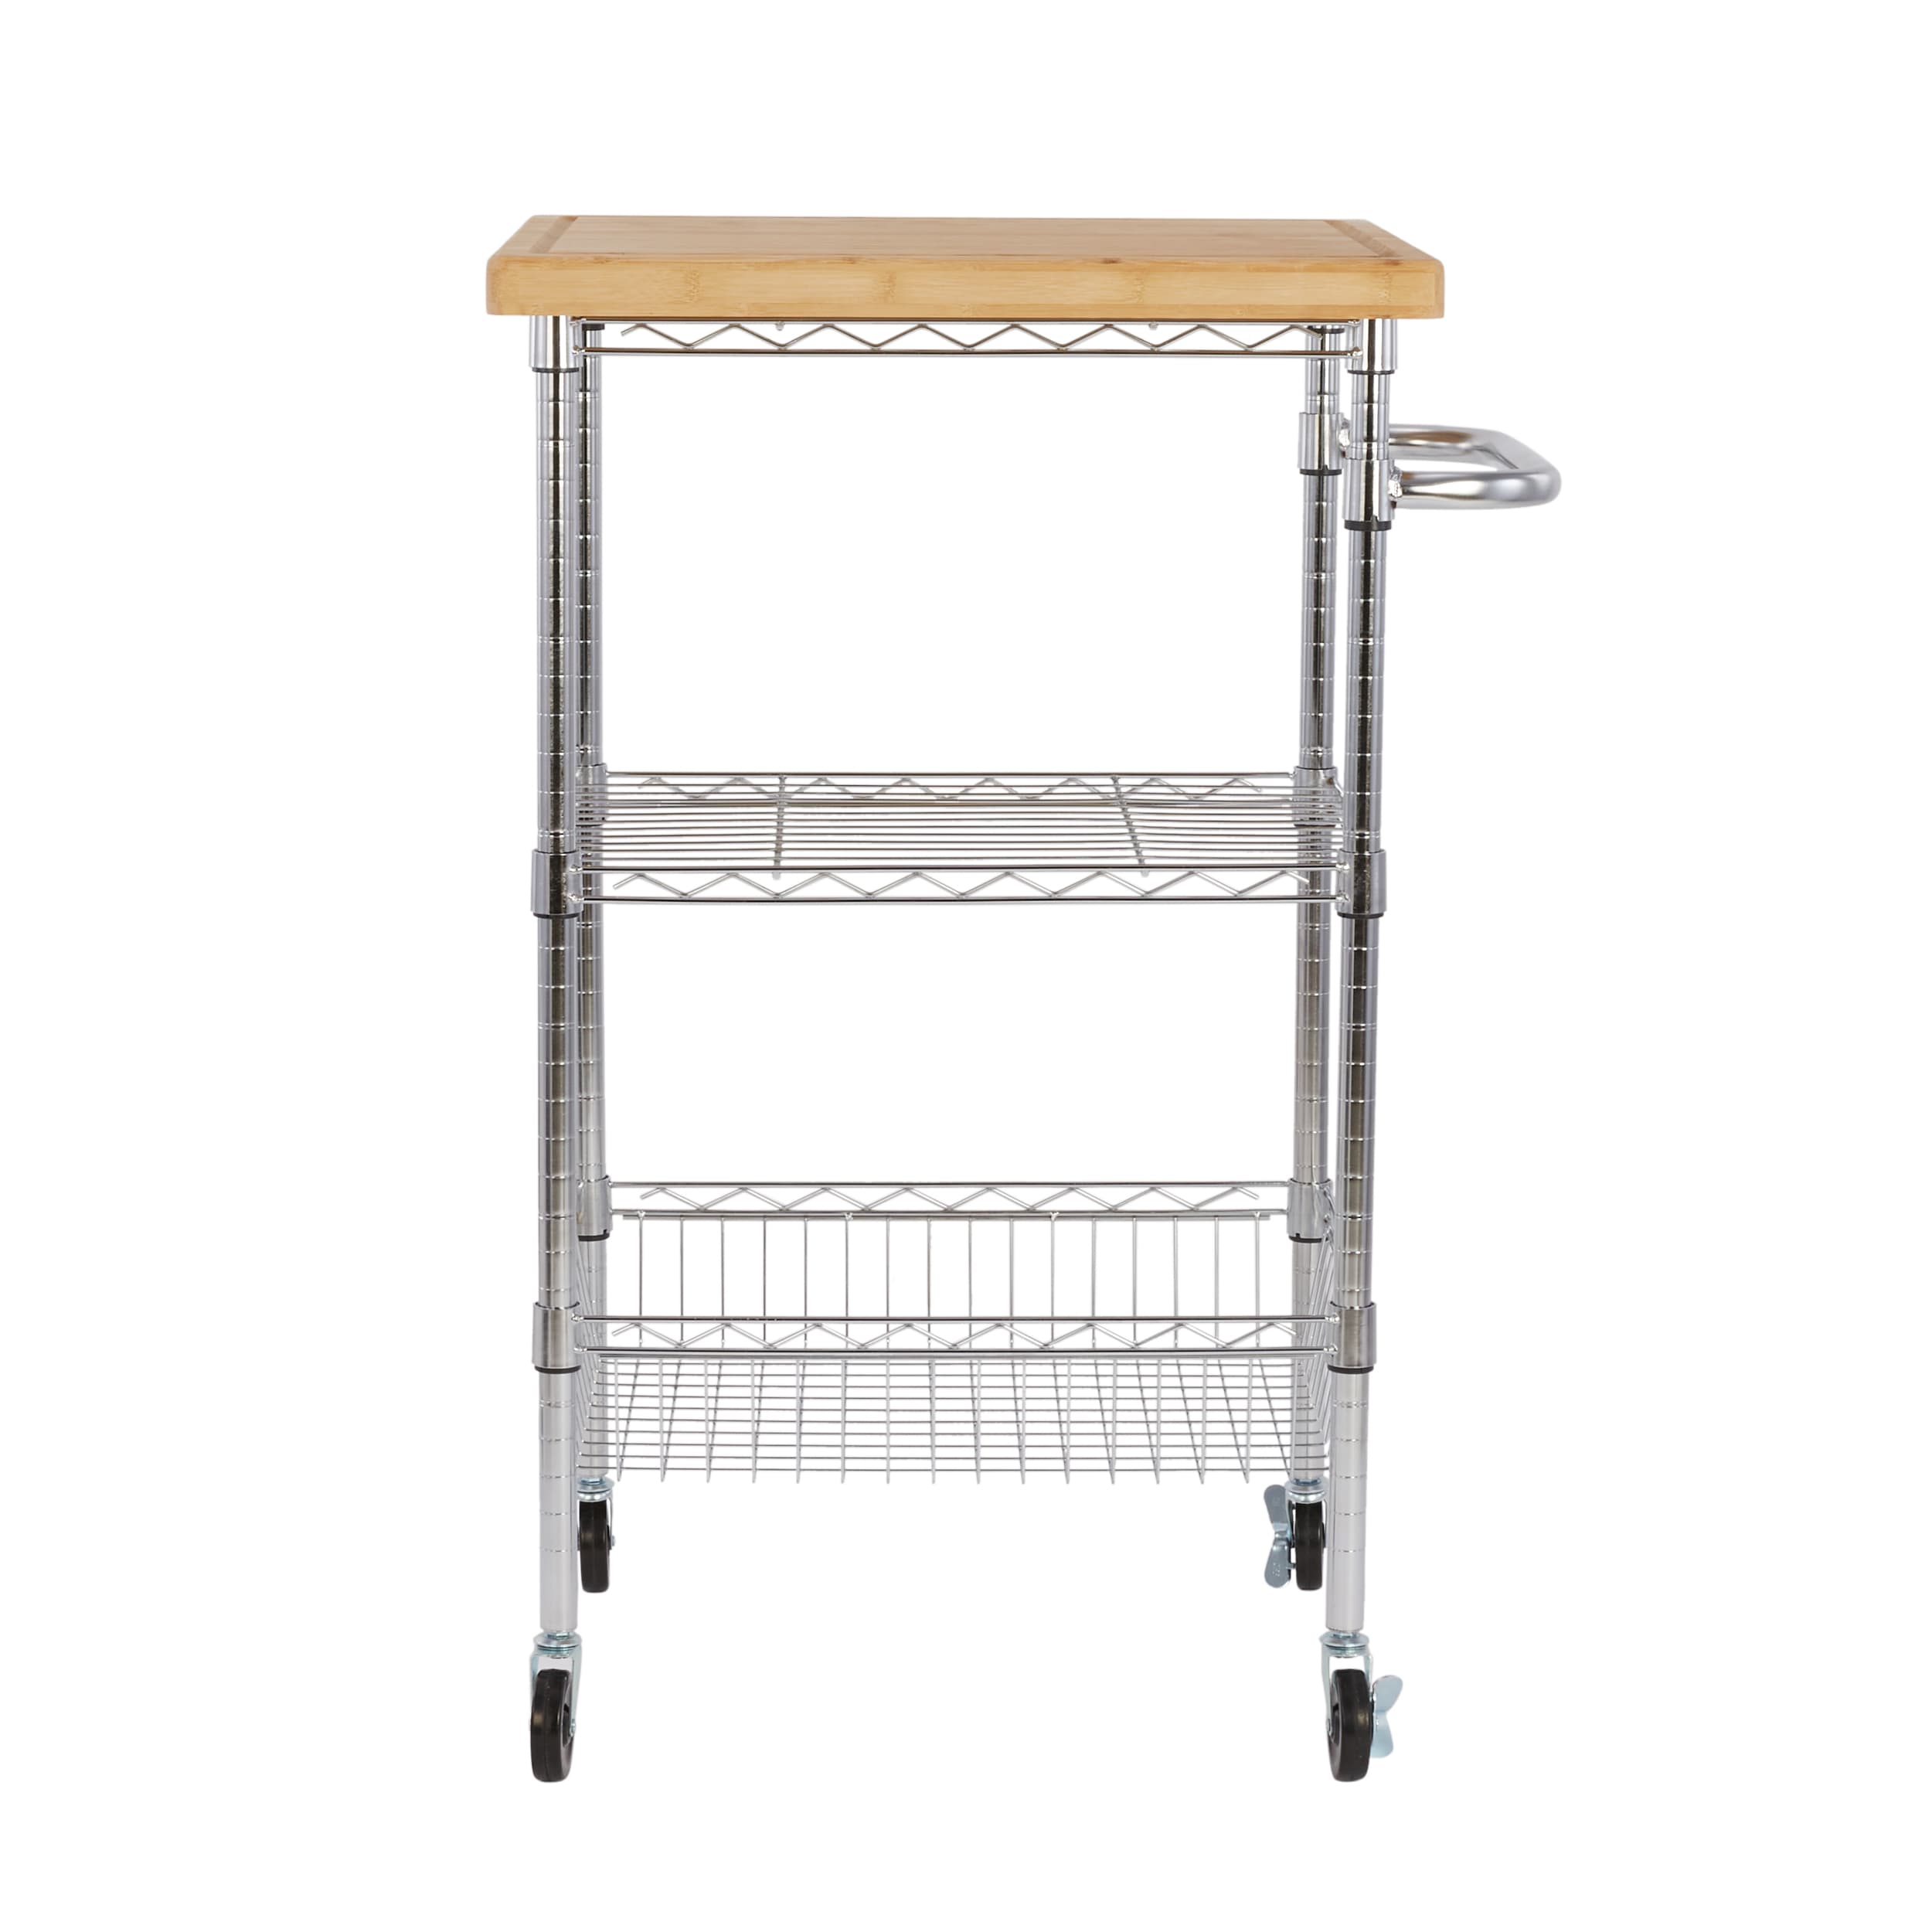 Wood Top Rolling Kitchen Cart